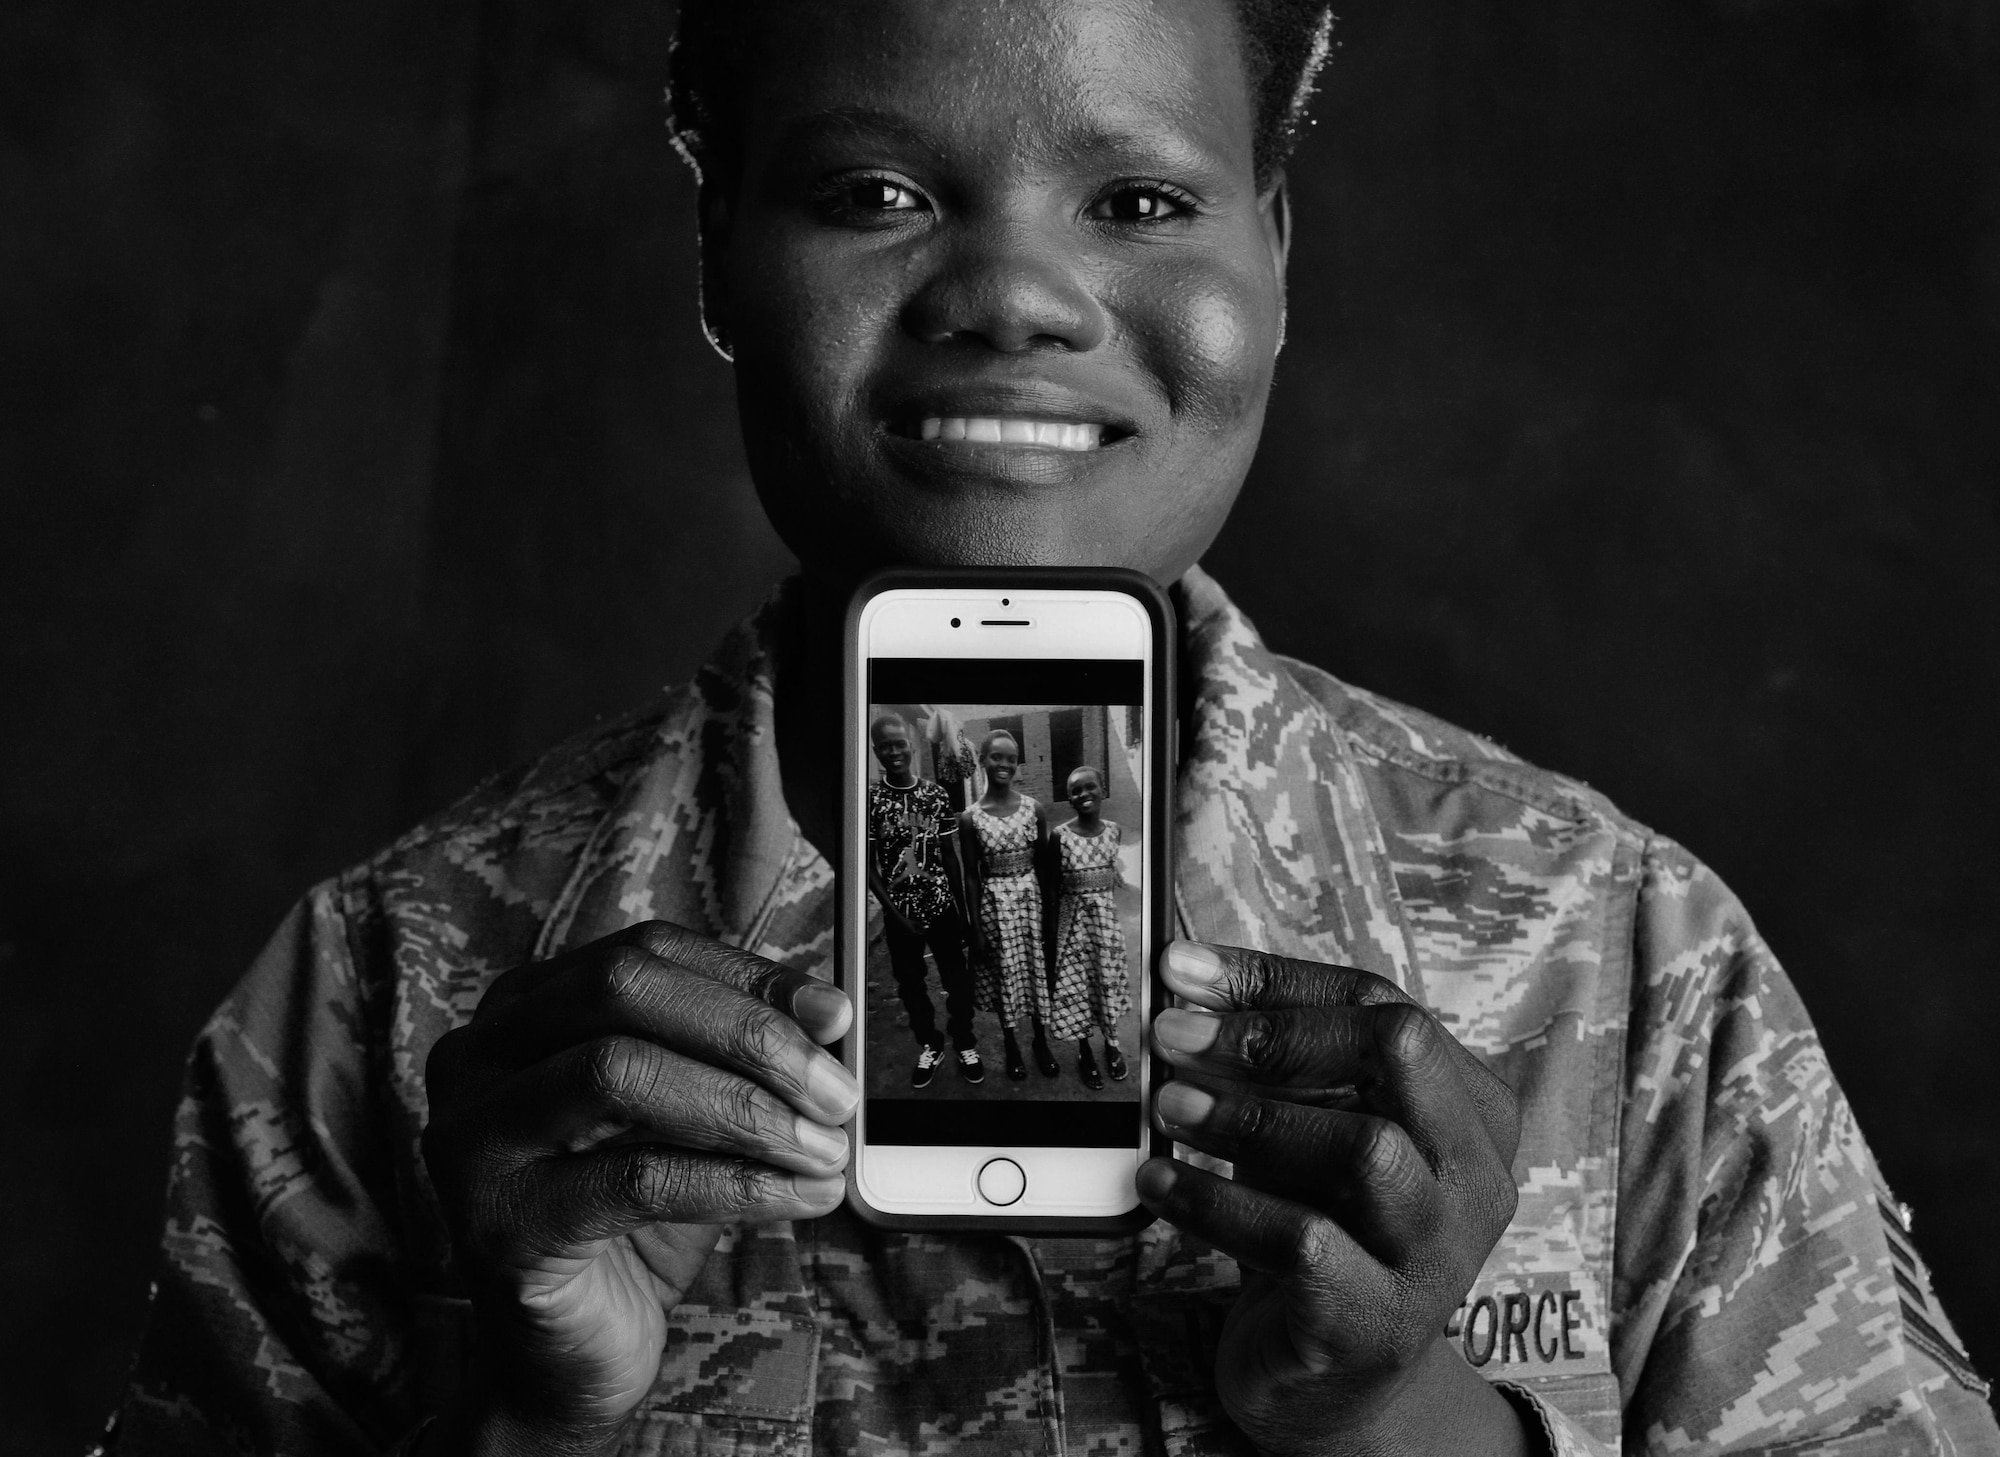 Staff Sgt. Martha Otto, a former South-Sudanese refugee, holds a photo of her nephew and nieces, whom, like Otto years ago, fled their civil war-torn country of South Sudan in search of safety from Joseph Kony’s Lord Resistance Army. The 86th Logistics Readiness Squadron training manager recently financially assisted her family out of a North Ugandan refugee camp and into boarding school and is passionate about sharing her story to help others. (U.S. Air Force photo by Staff Sgt. Nesha Humes)